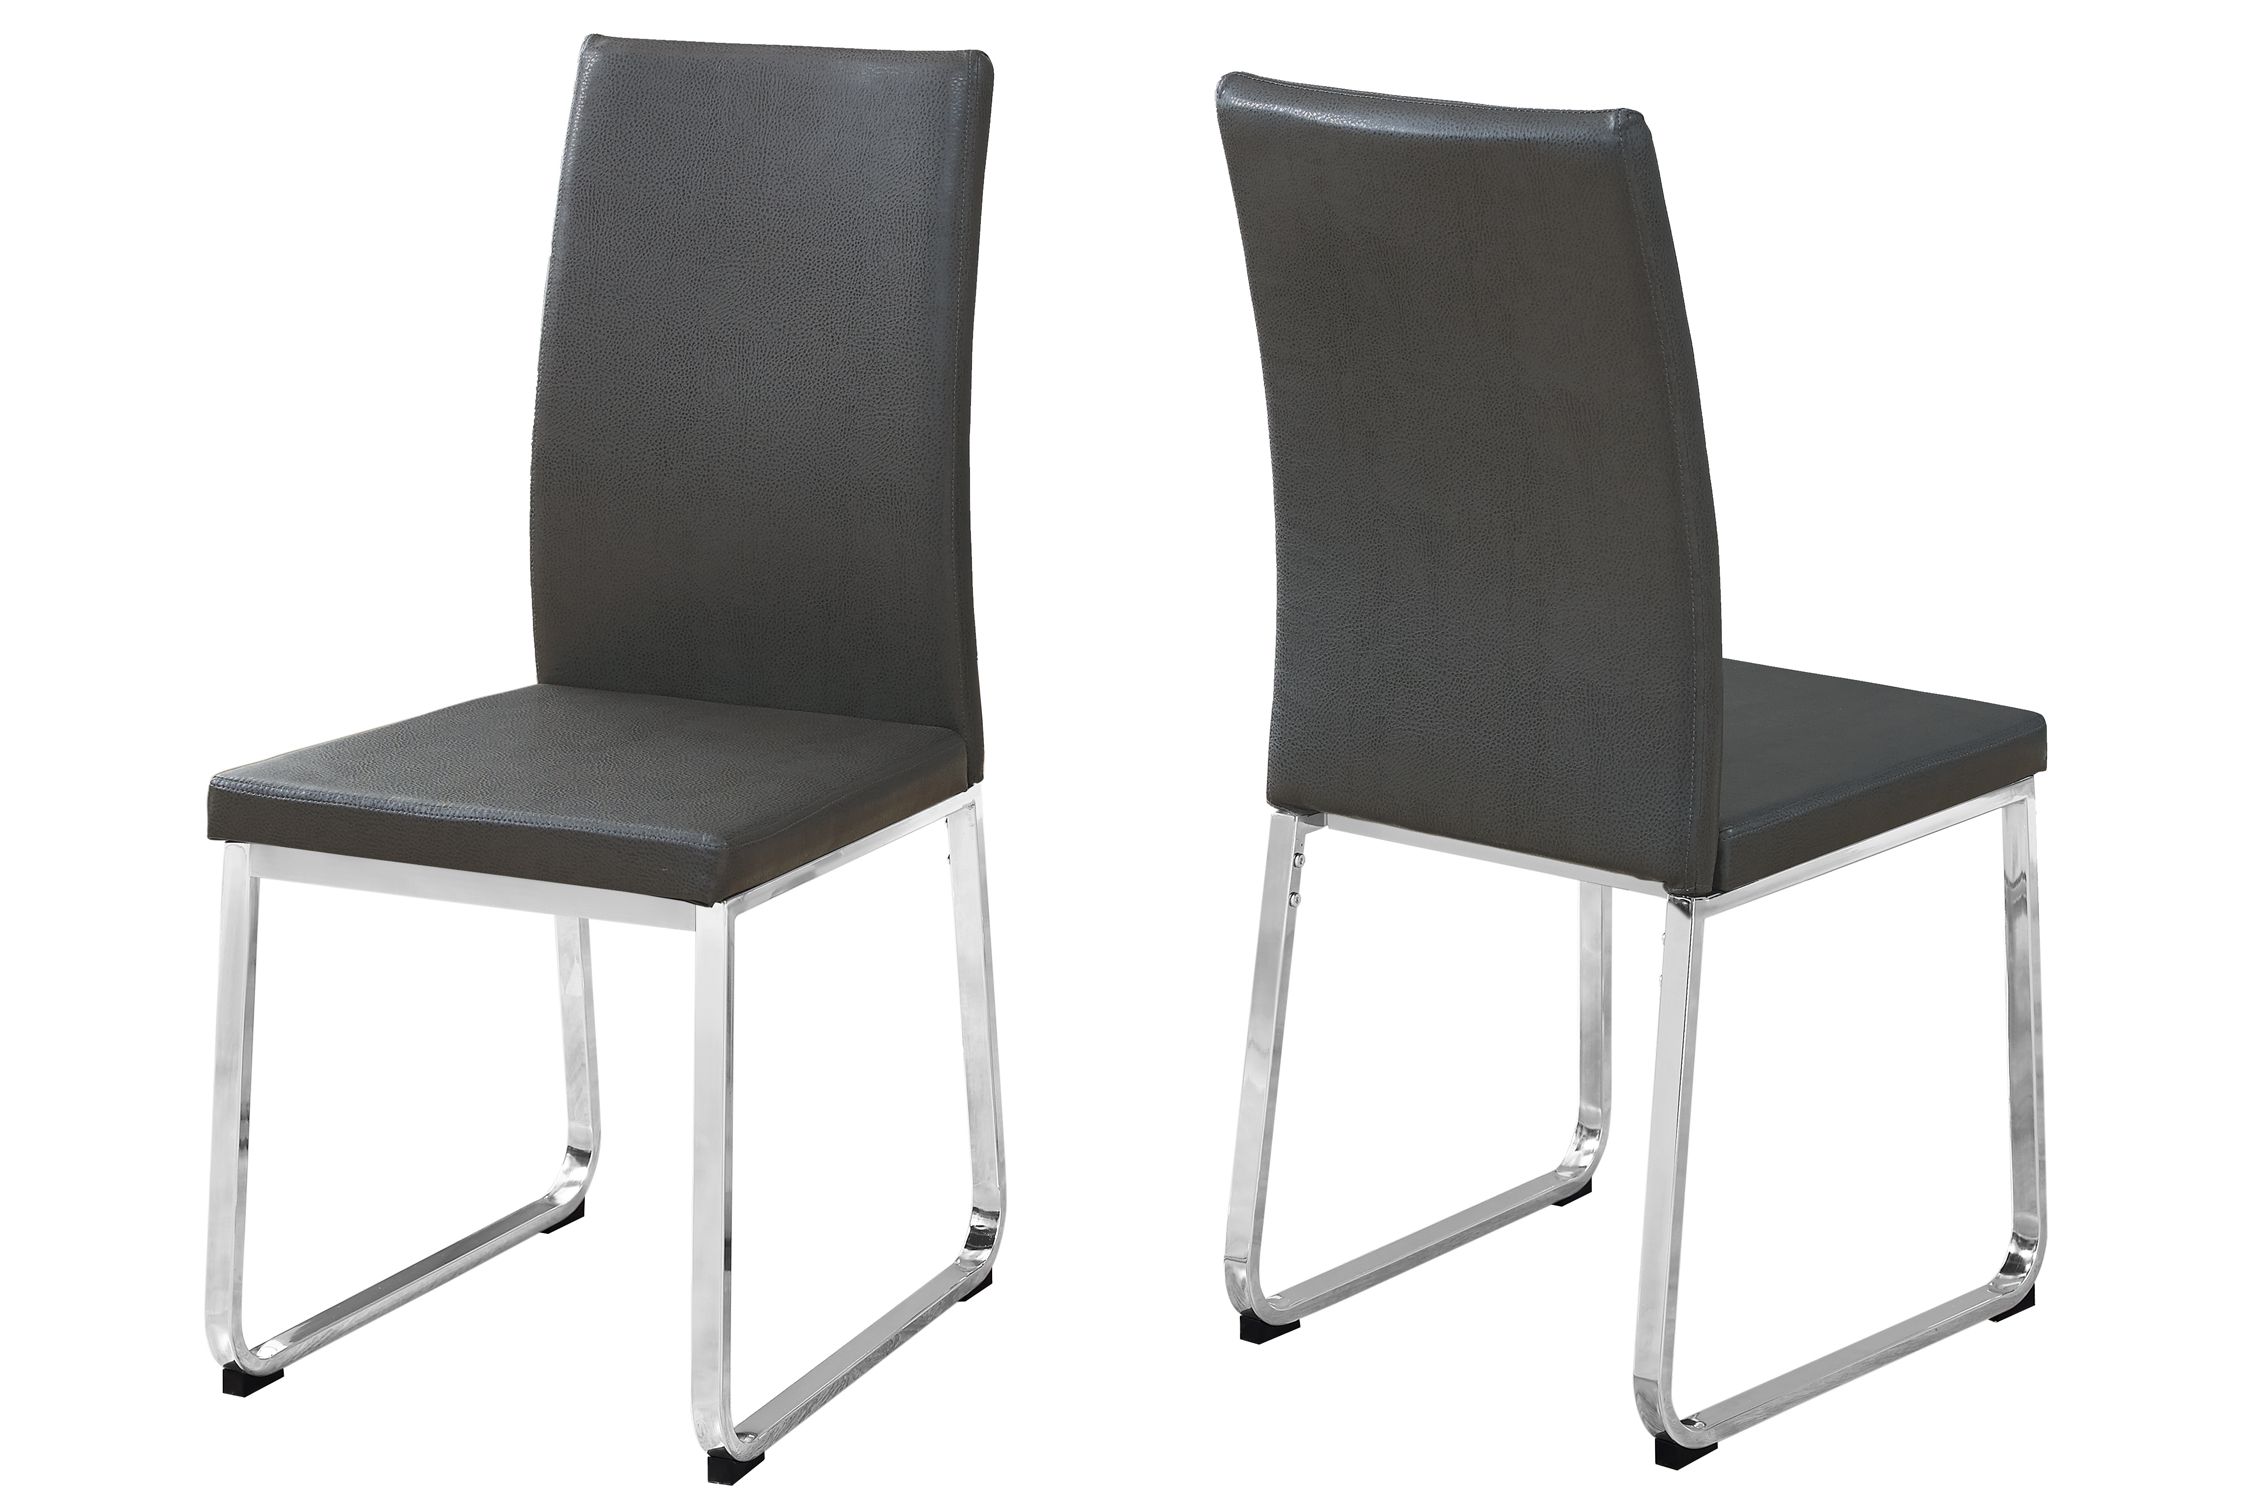 Dining Chair - 2Pcs / 38"H / Grey Leather-Look / Chrome